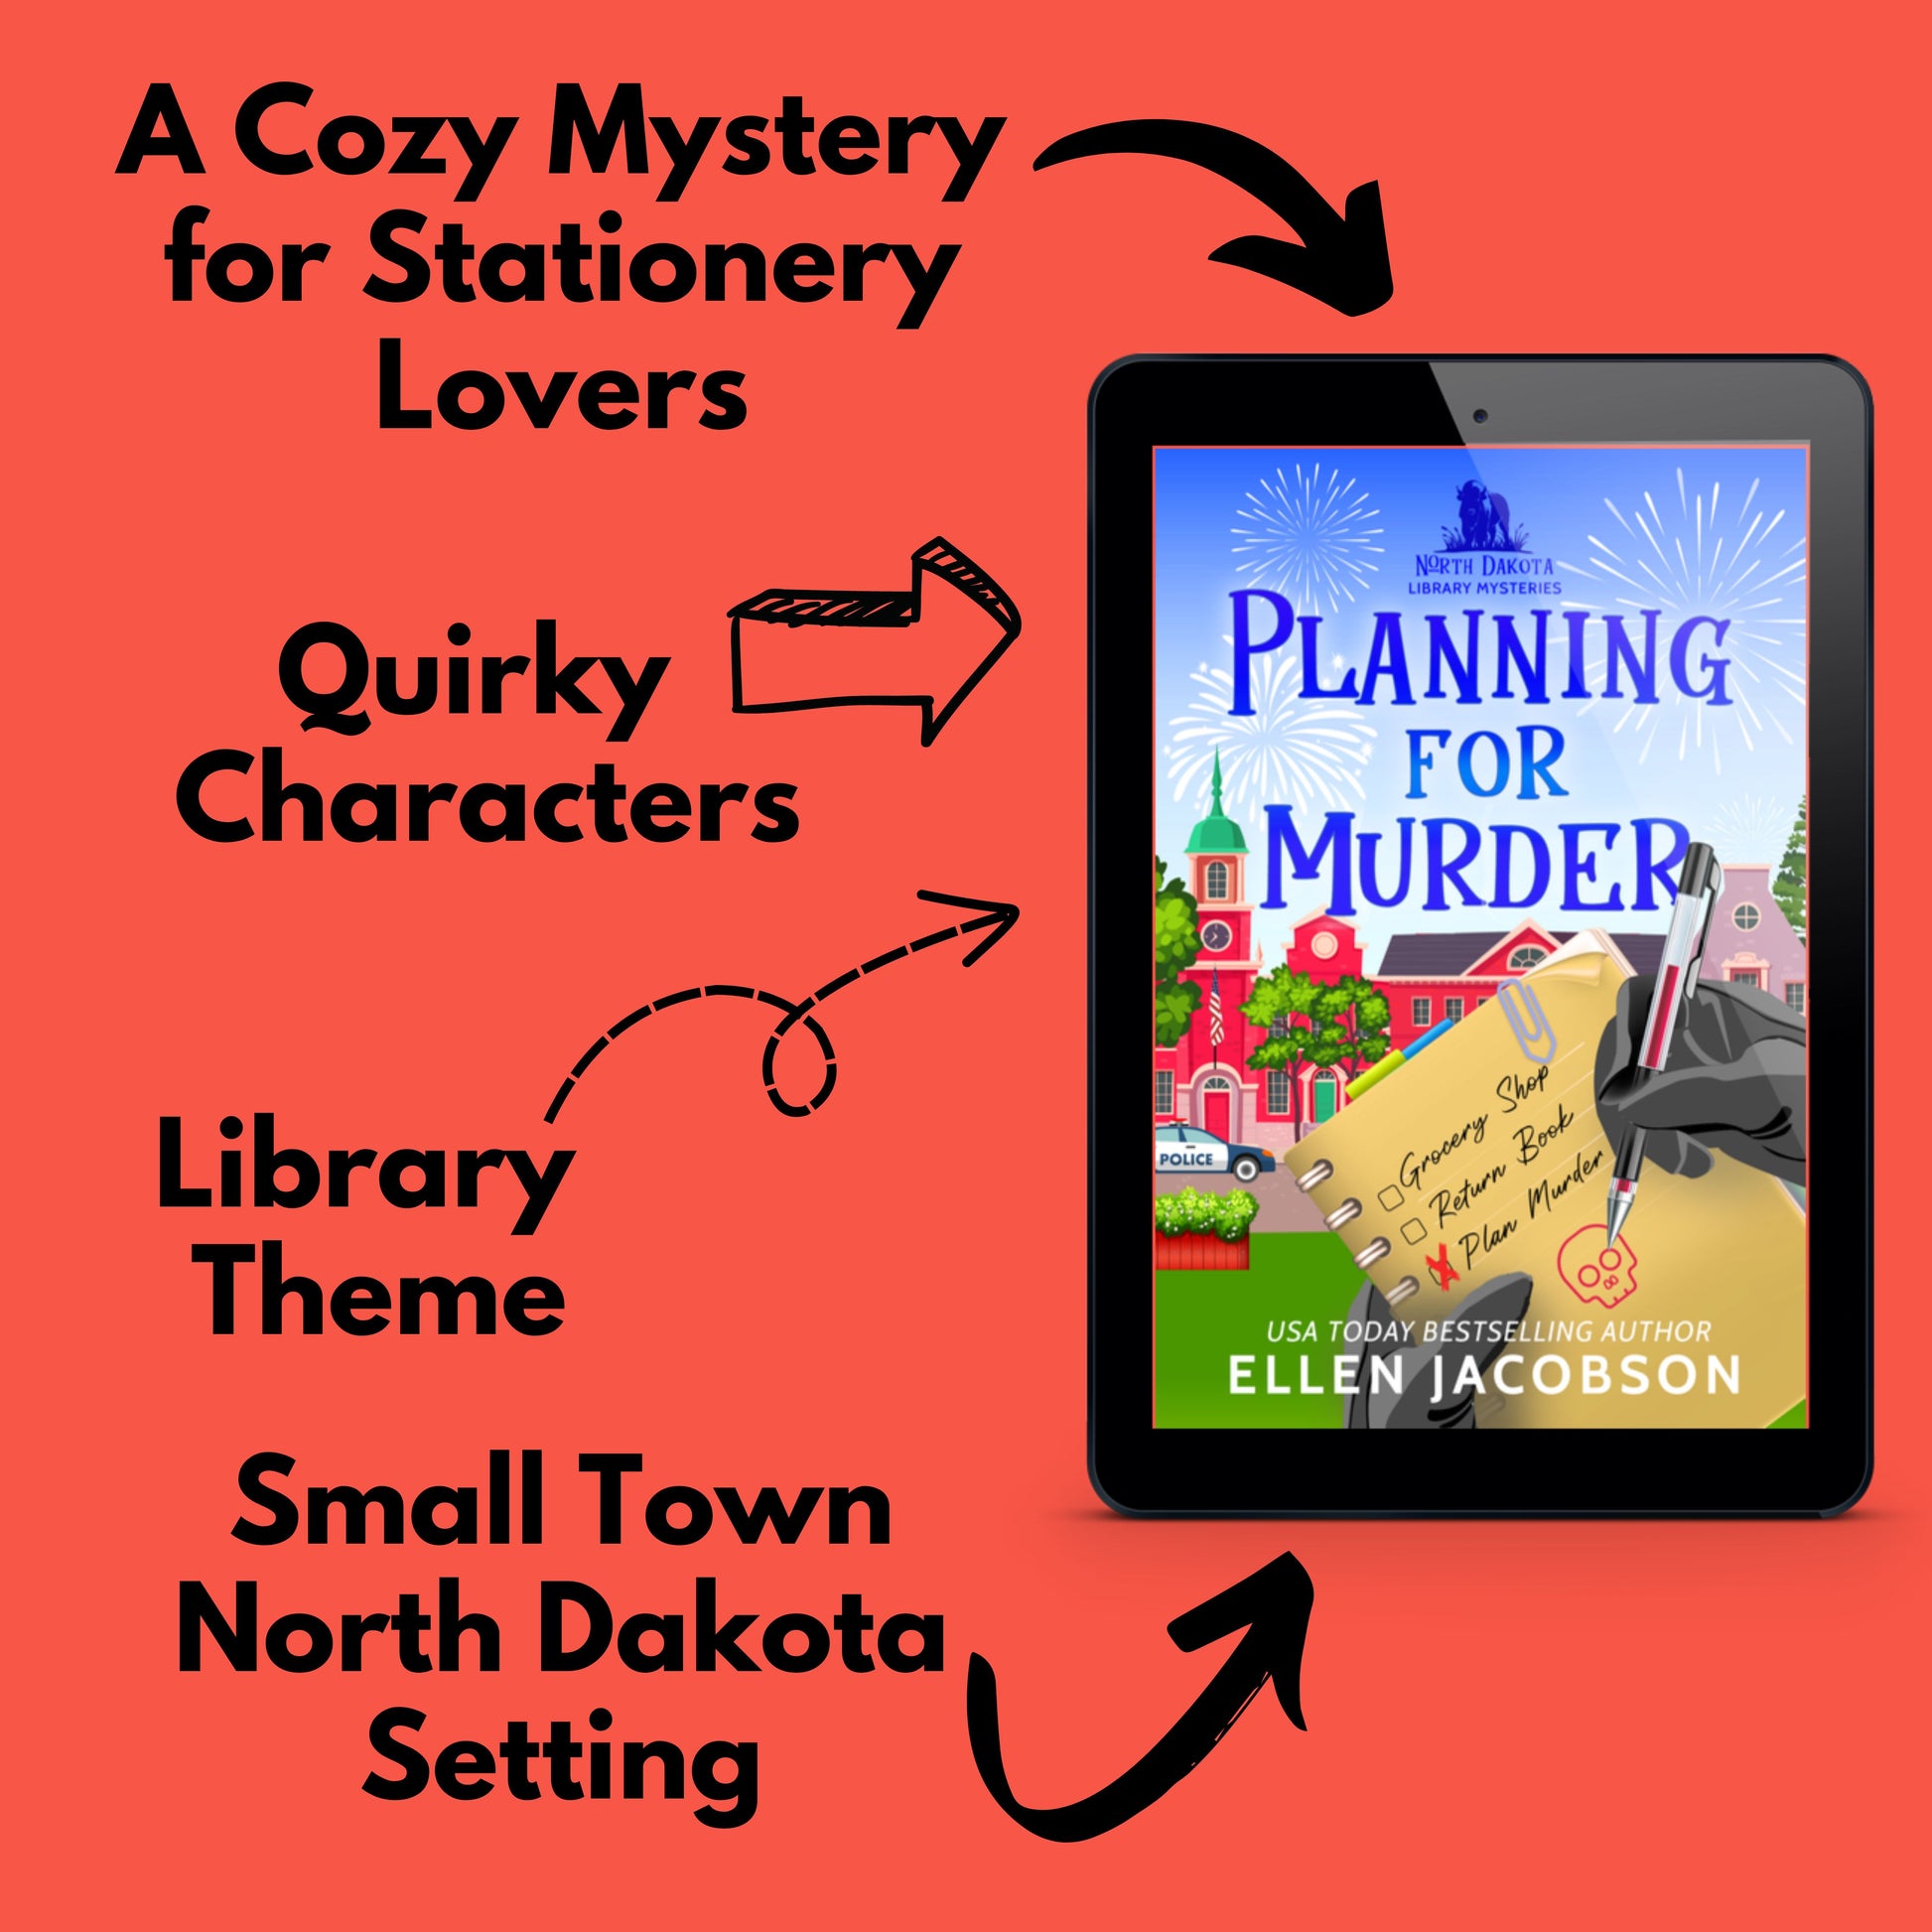 Planning for Murder ebook cover with text that says a cozy mystery for stationery lovers, quirky characters, library theme, and small town North Dakota setting